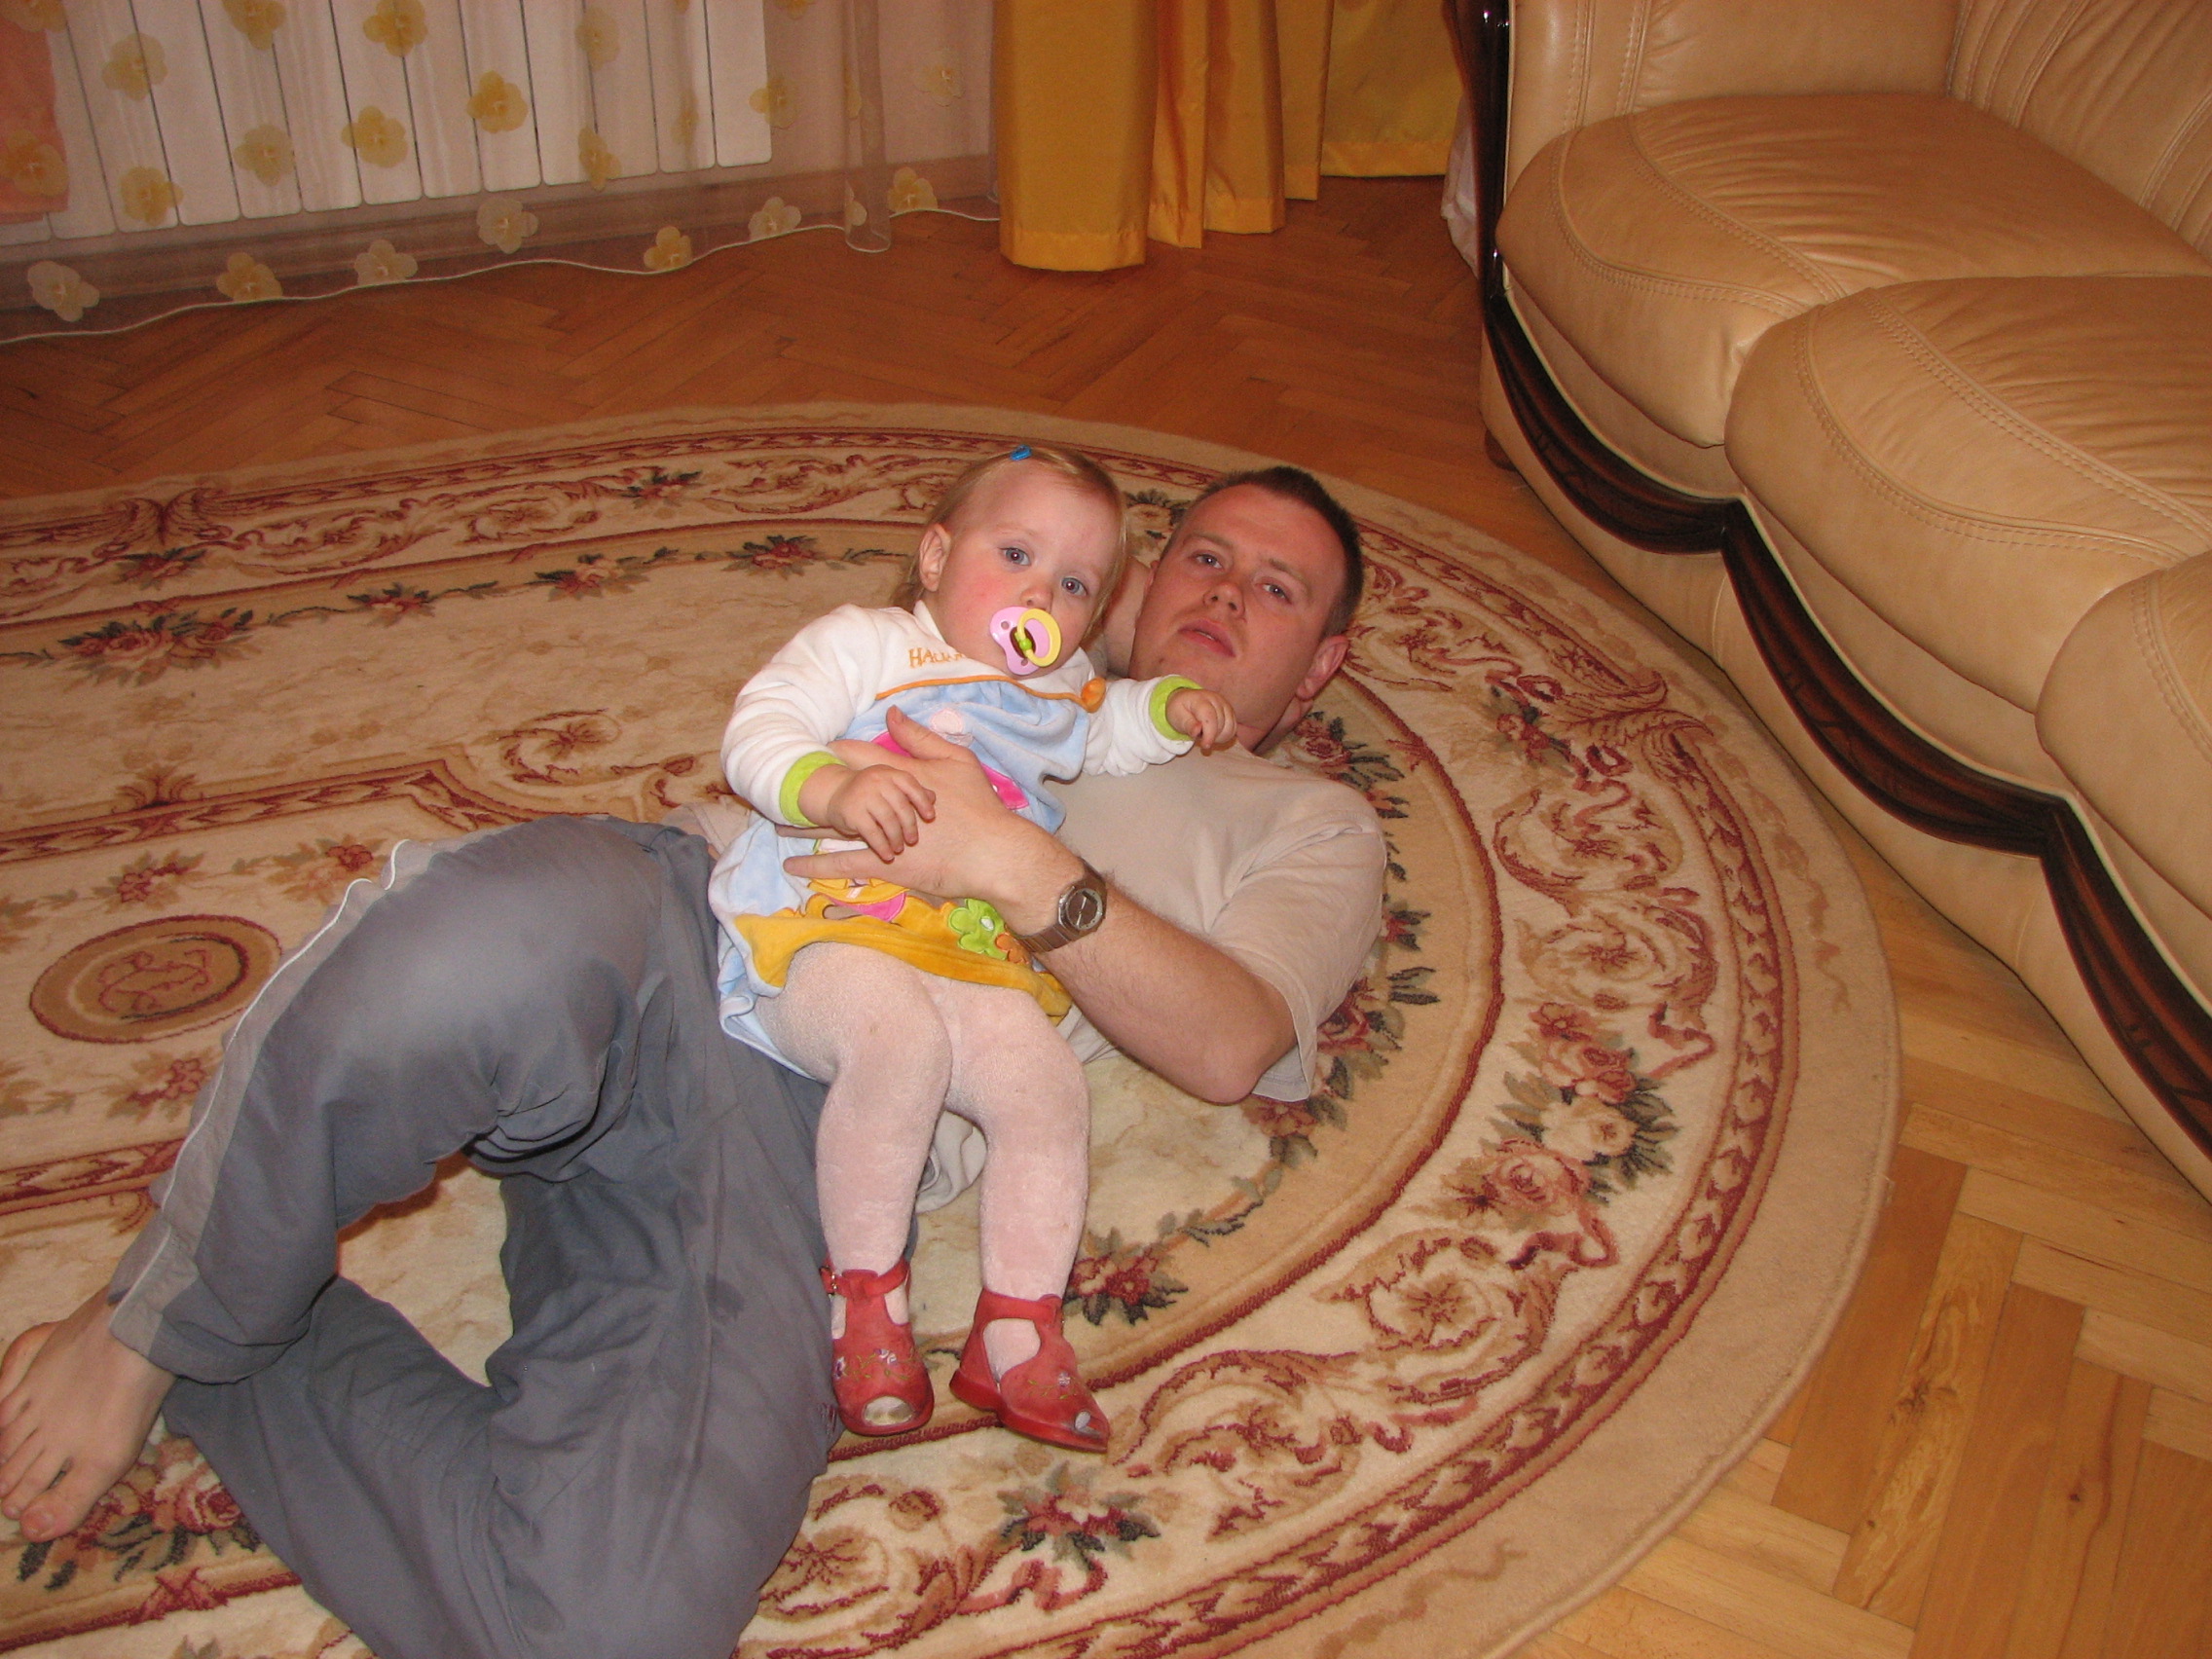 A baby kid girl with her father on a floor, picture 001